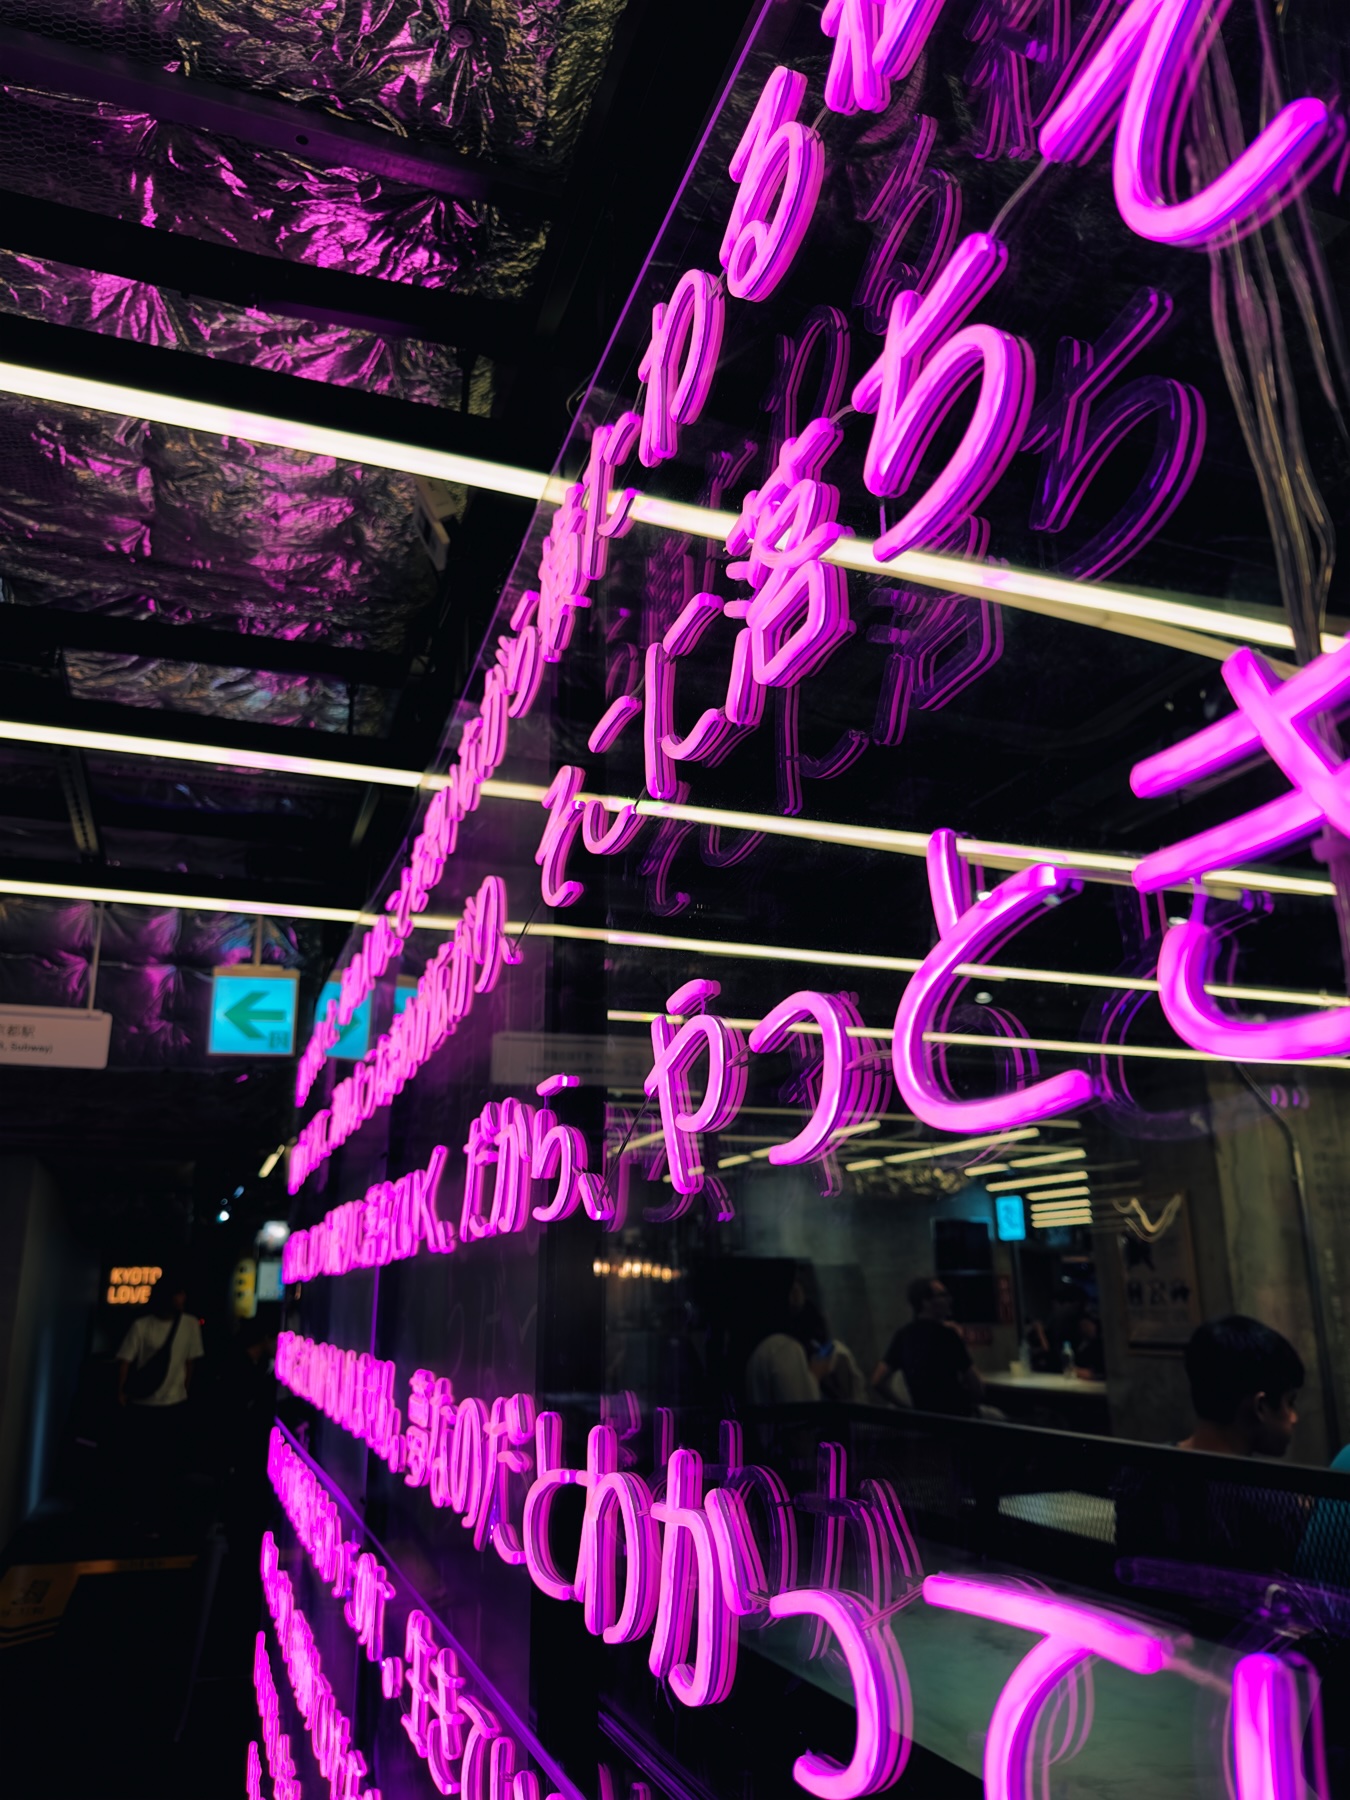 Purple neon sign of japanese writing in the food hall